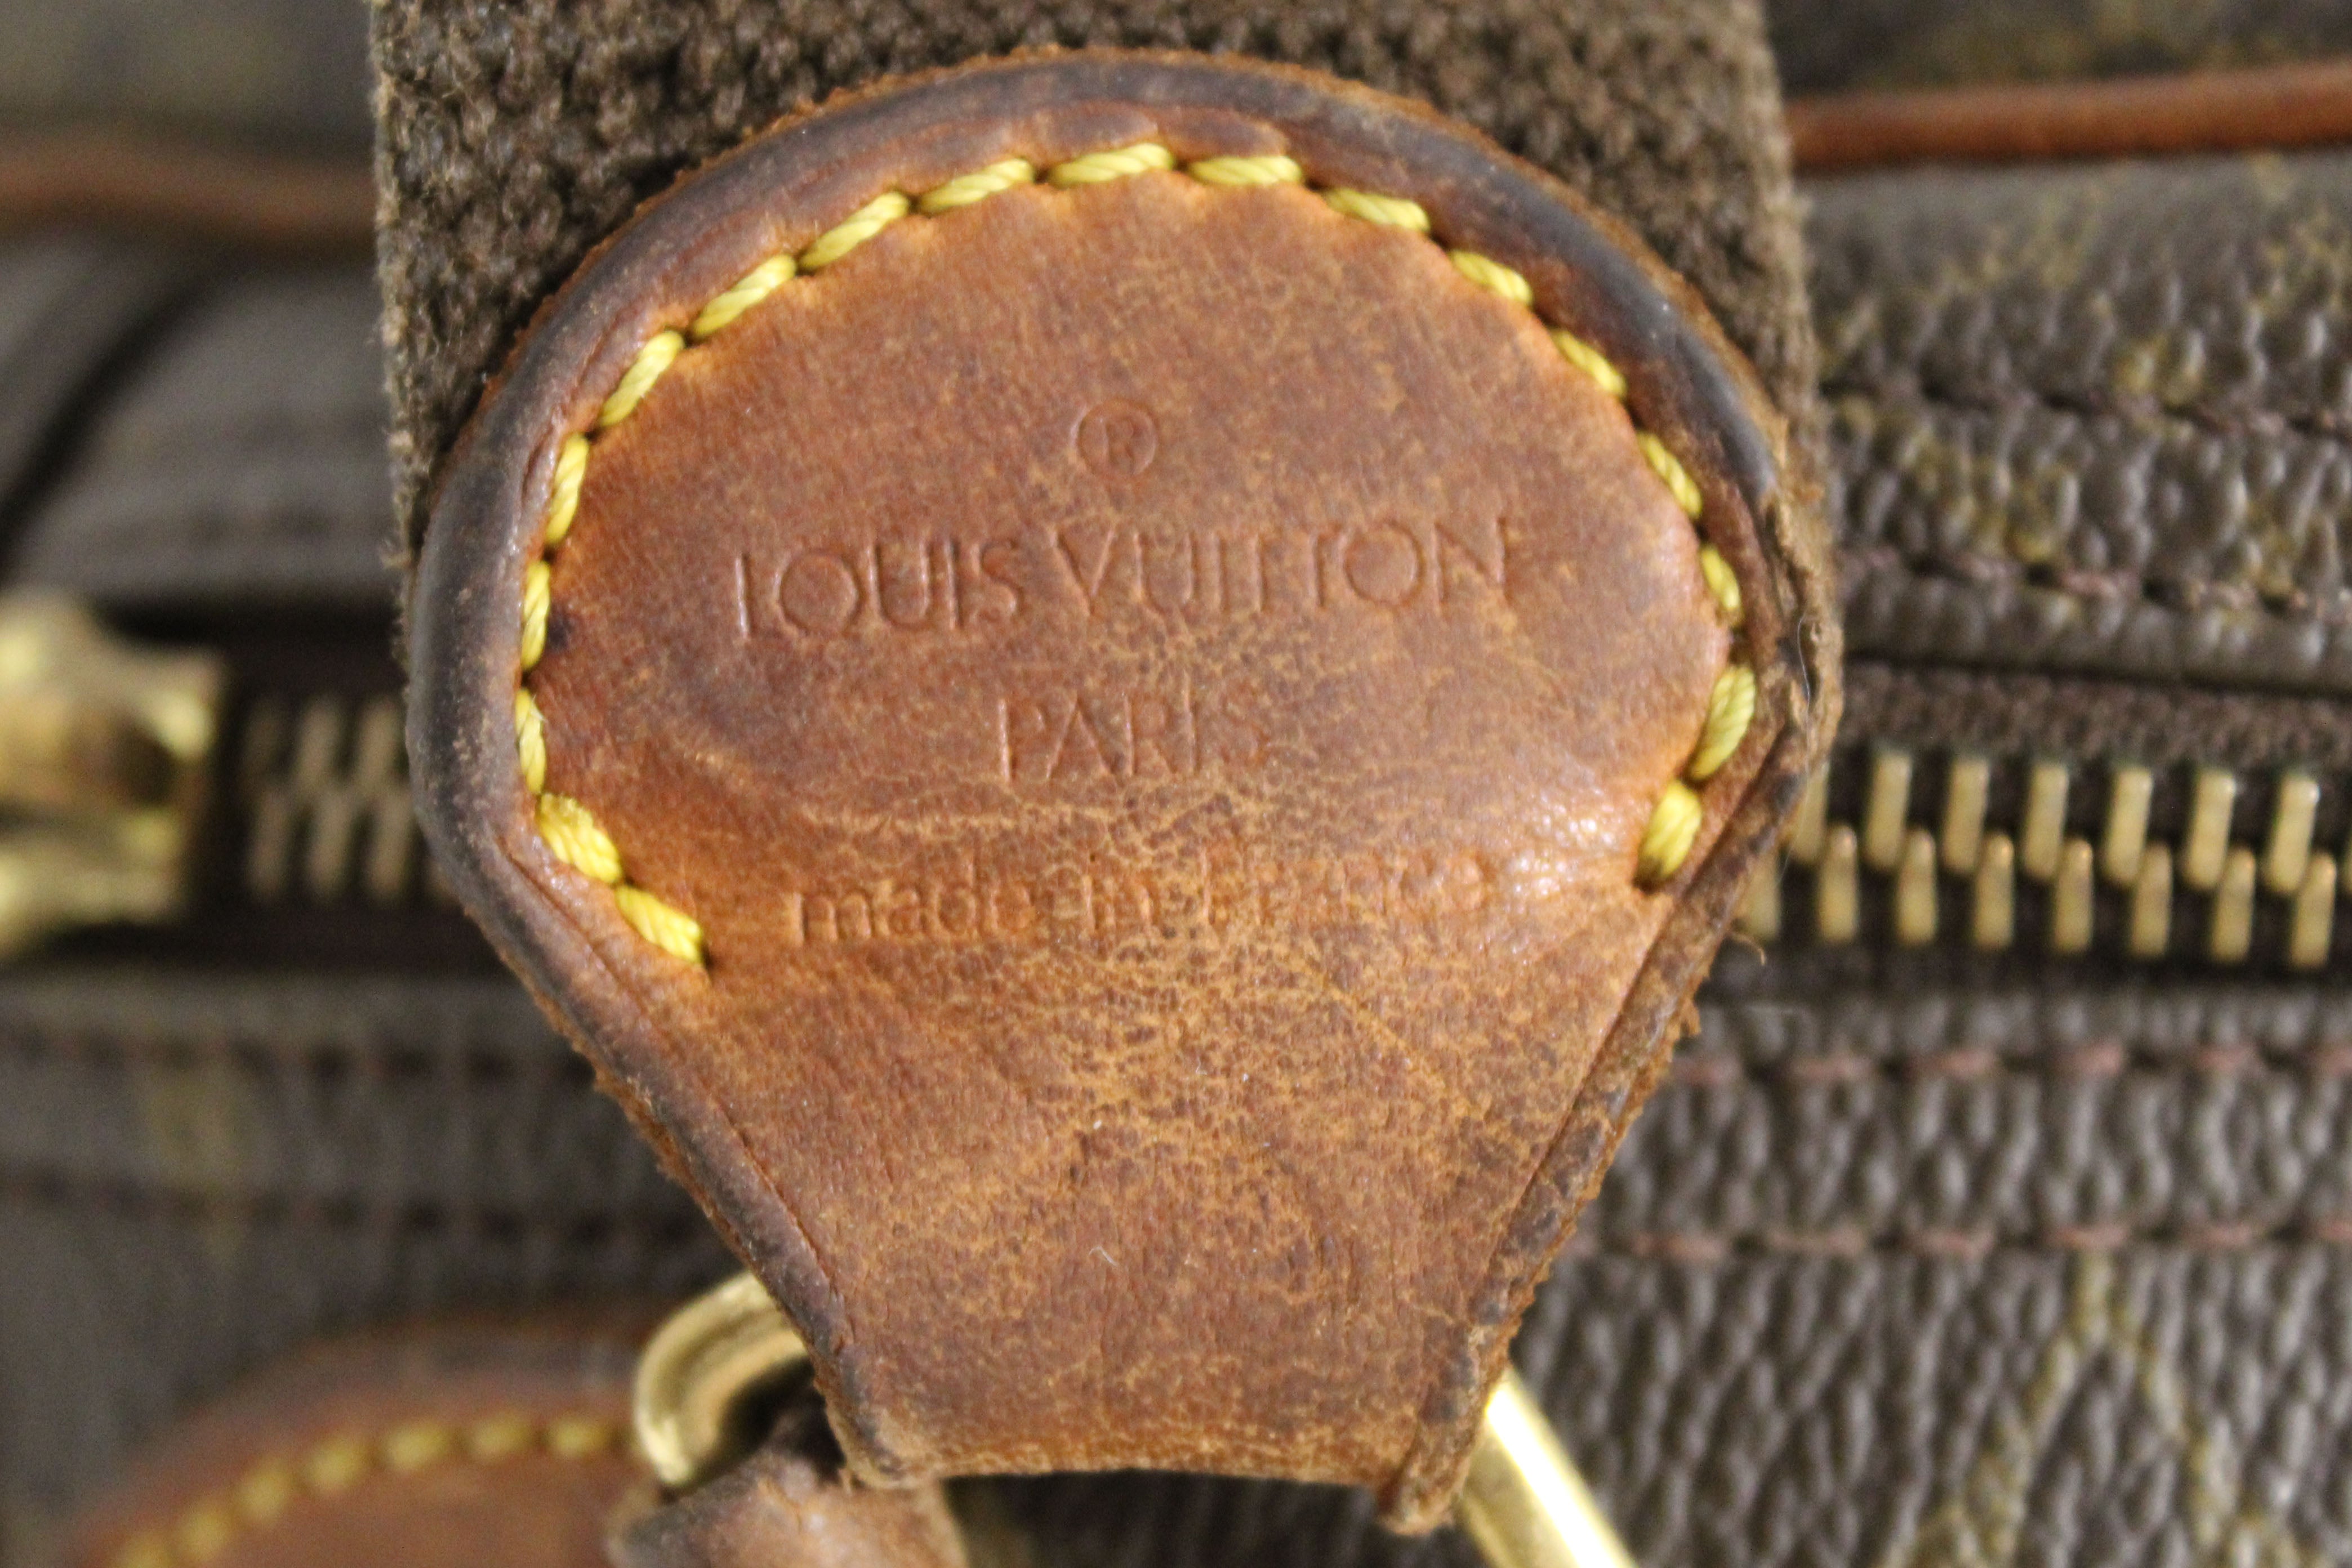 where to buy authentic louis vuitton bags